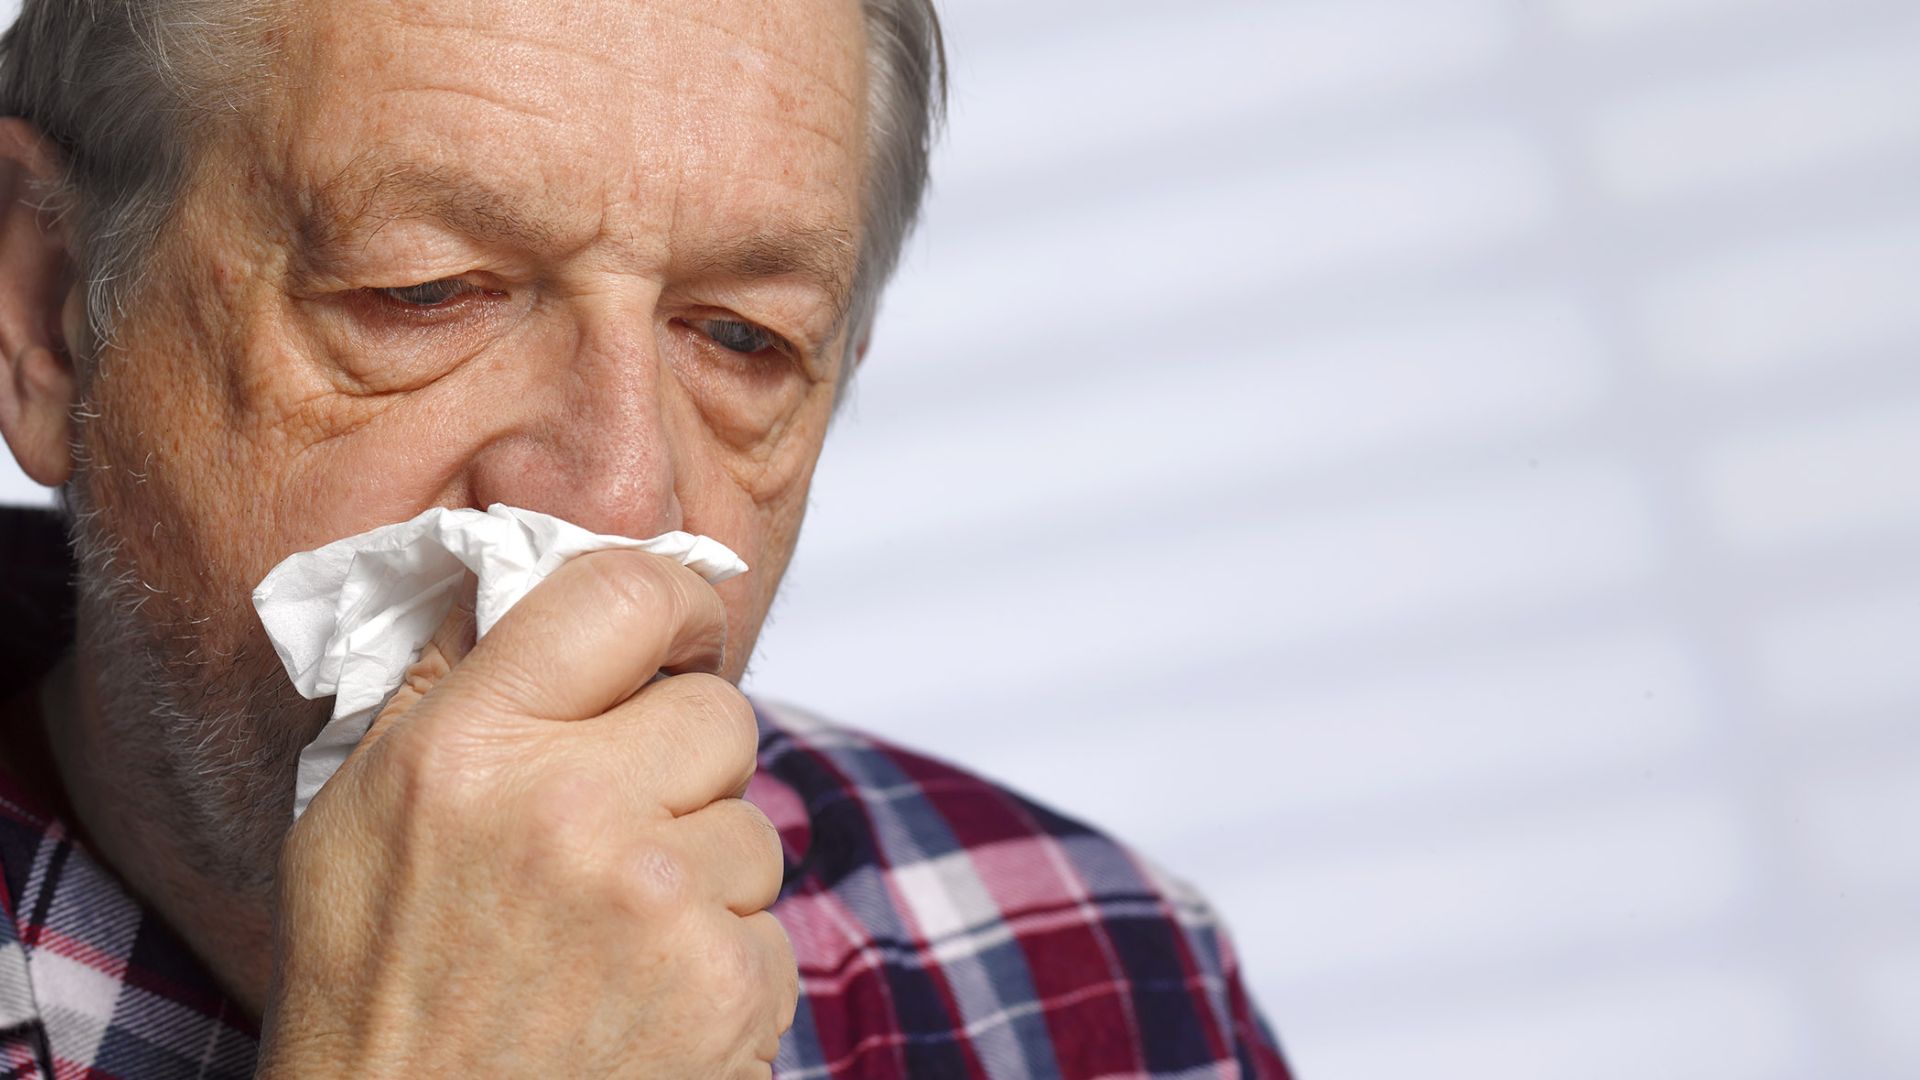 Old Man Covering Mouth With Tissue